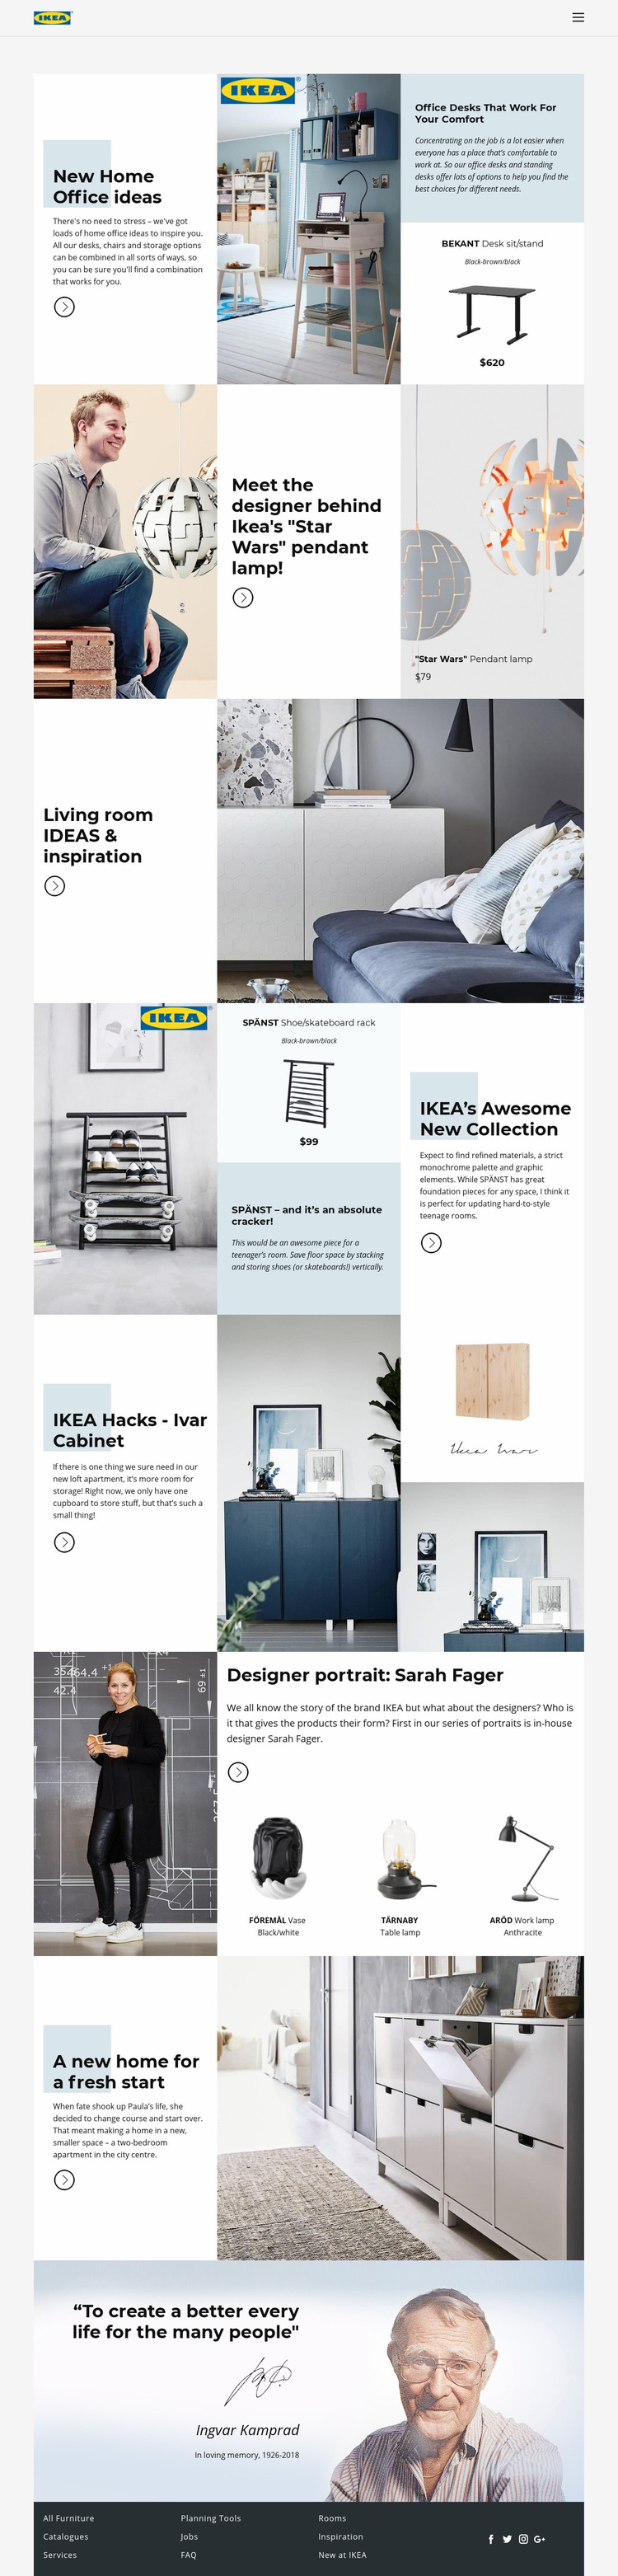 Inspiration from IKEA Web Page Design